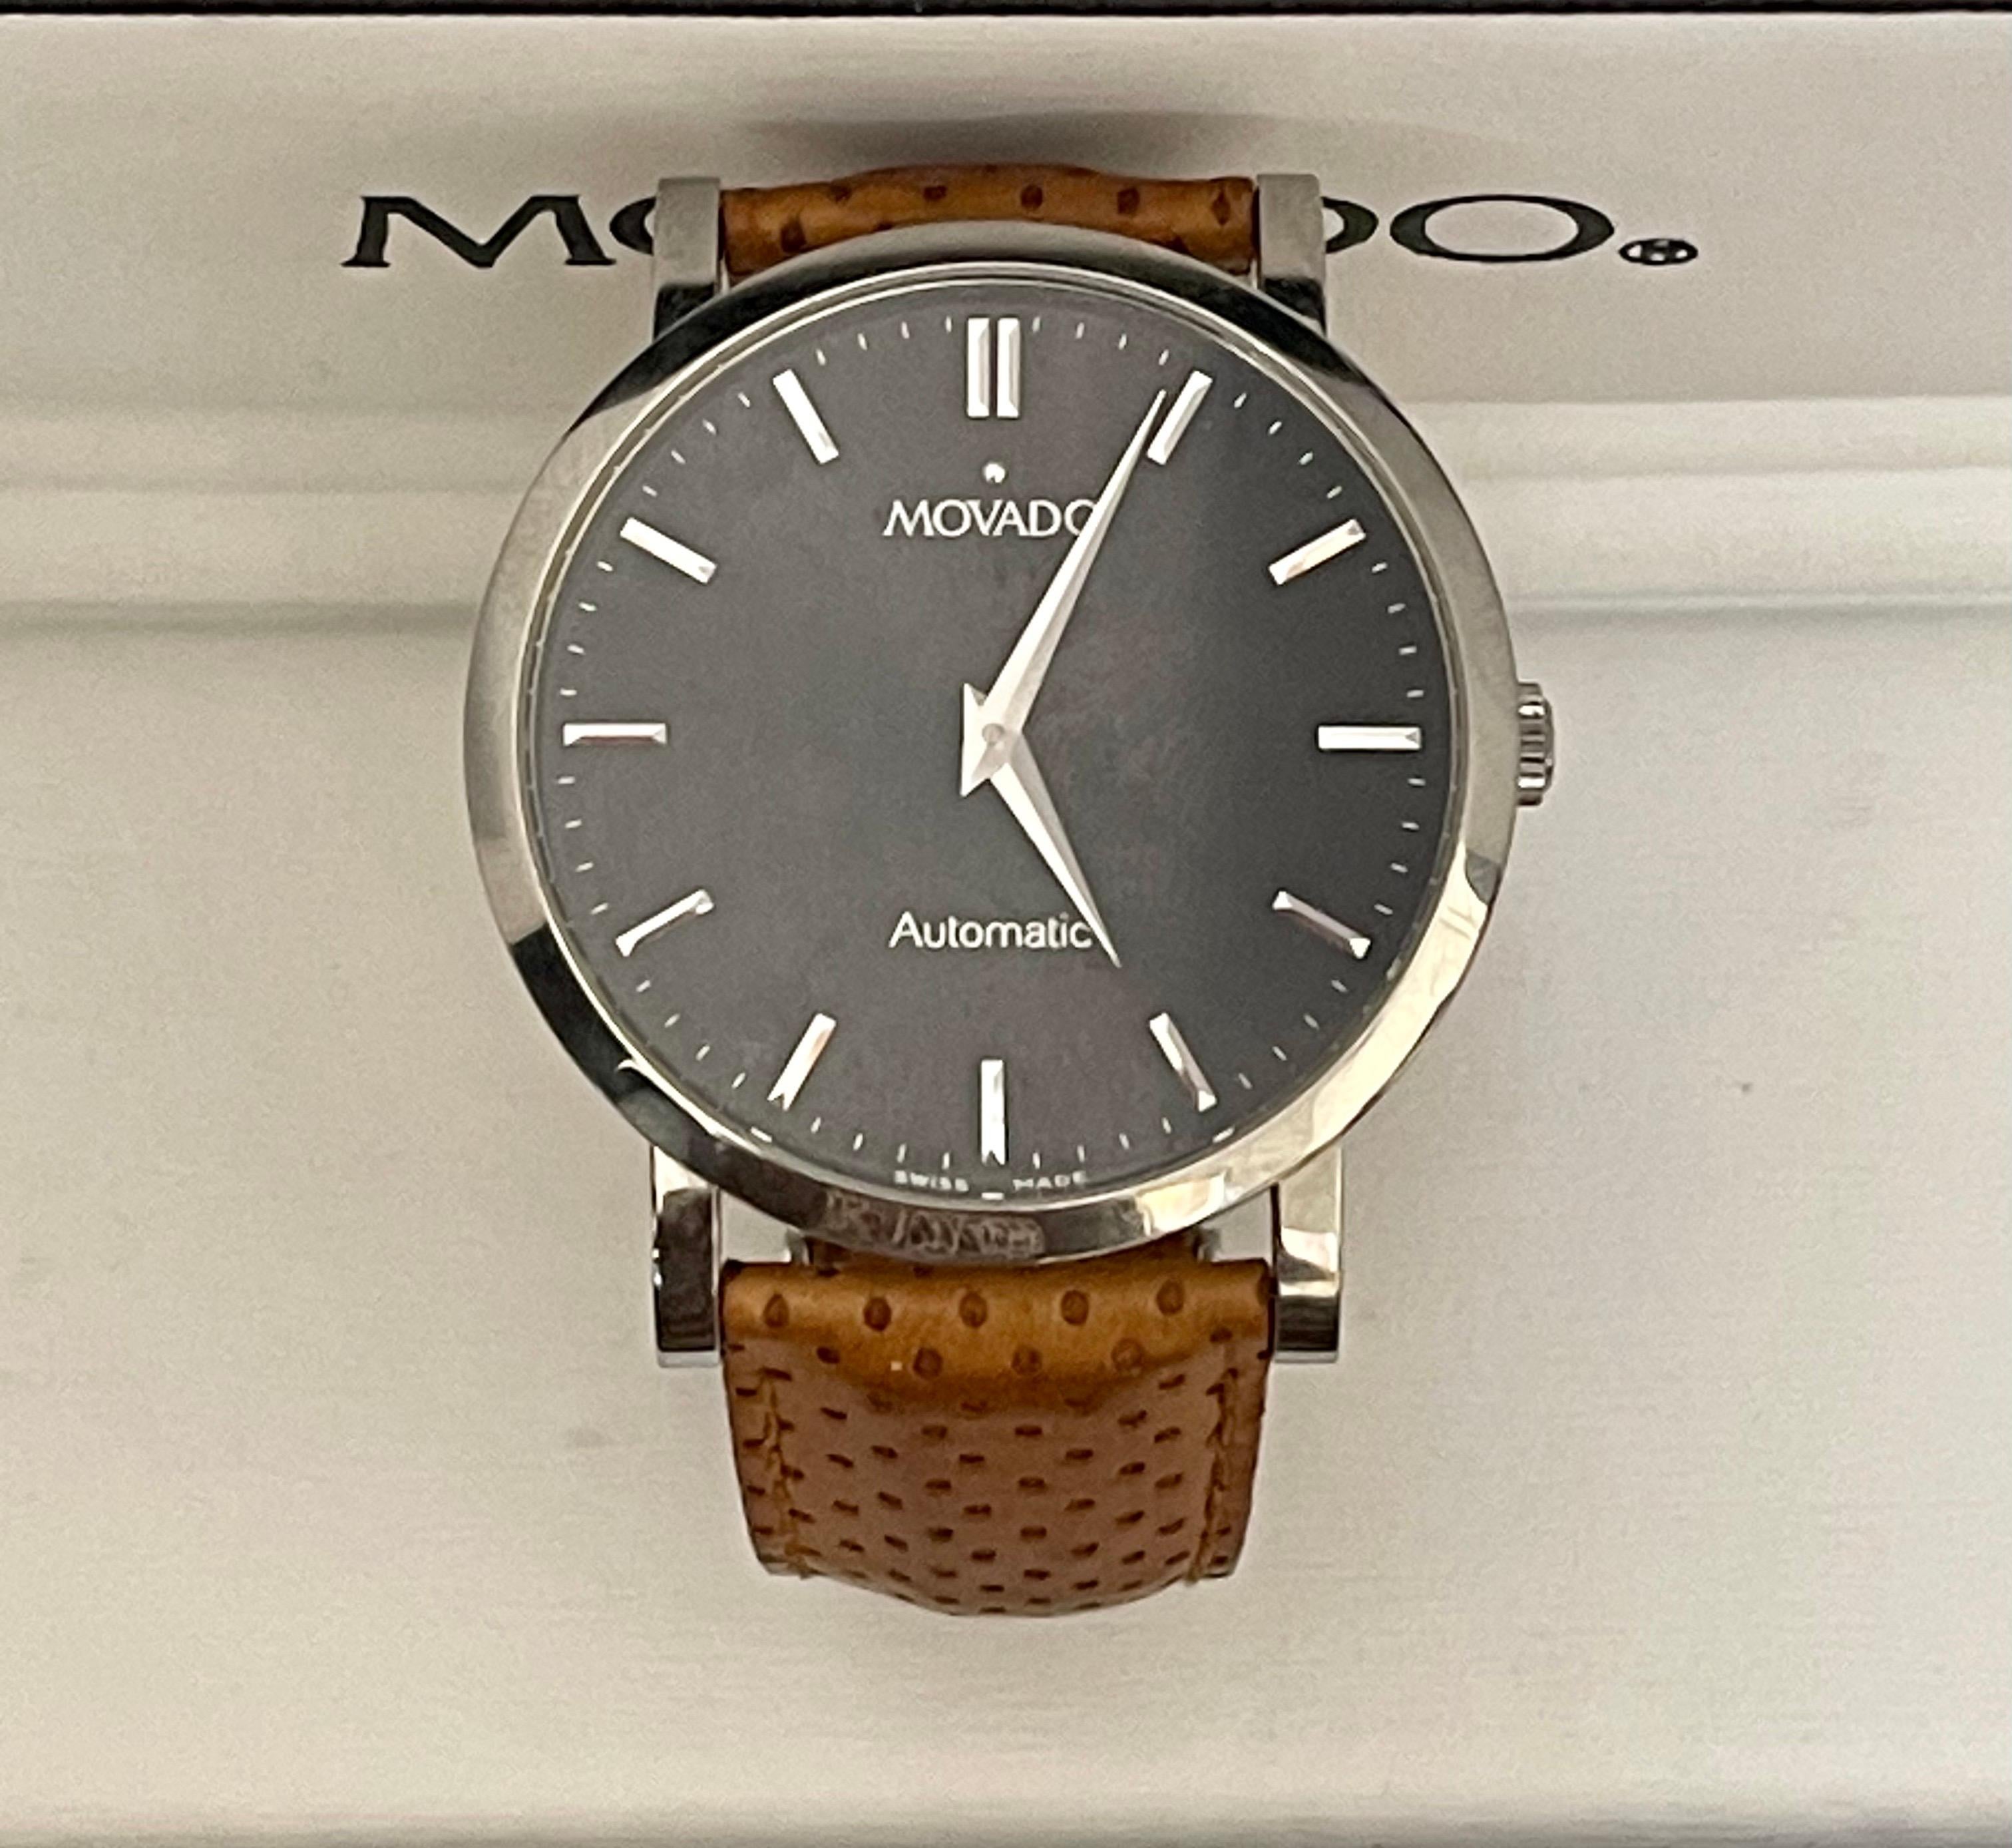 Watch is in very good condition
Total length of the watch with leather belt is 9.1 inch
Department:	Men	                                                                           Reference Number:	Does Not Apply
Watch Shape: Round	                  